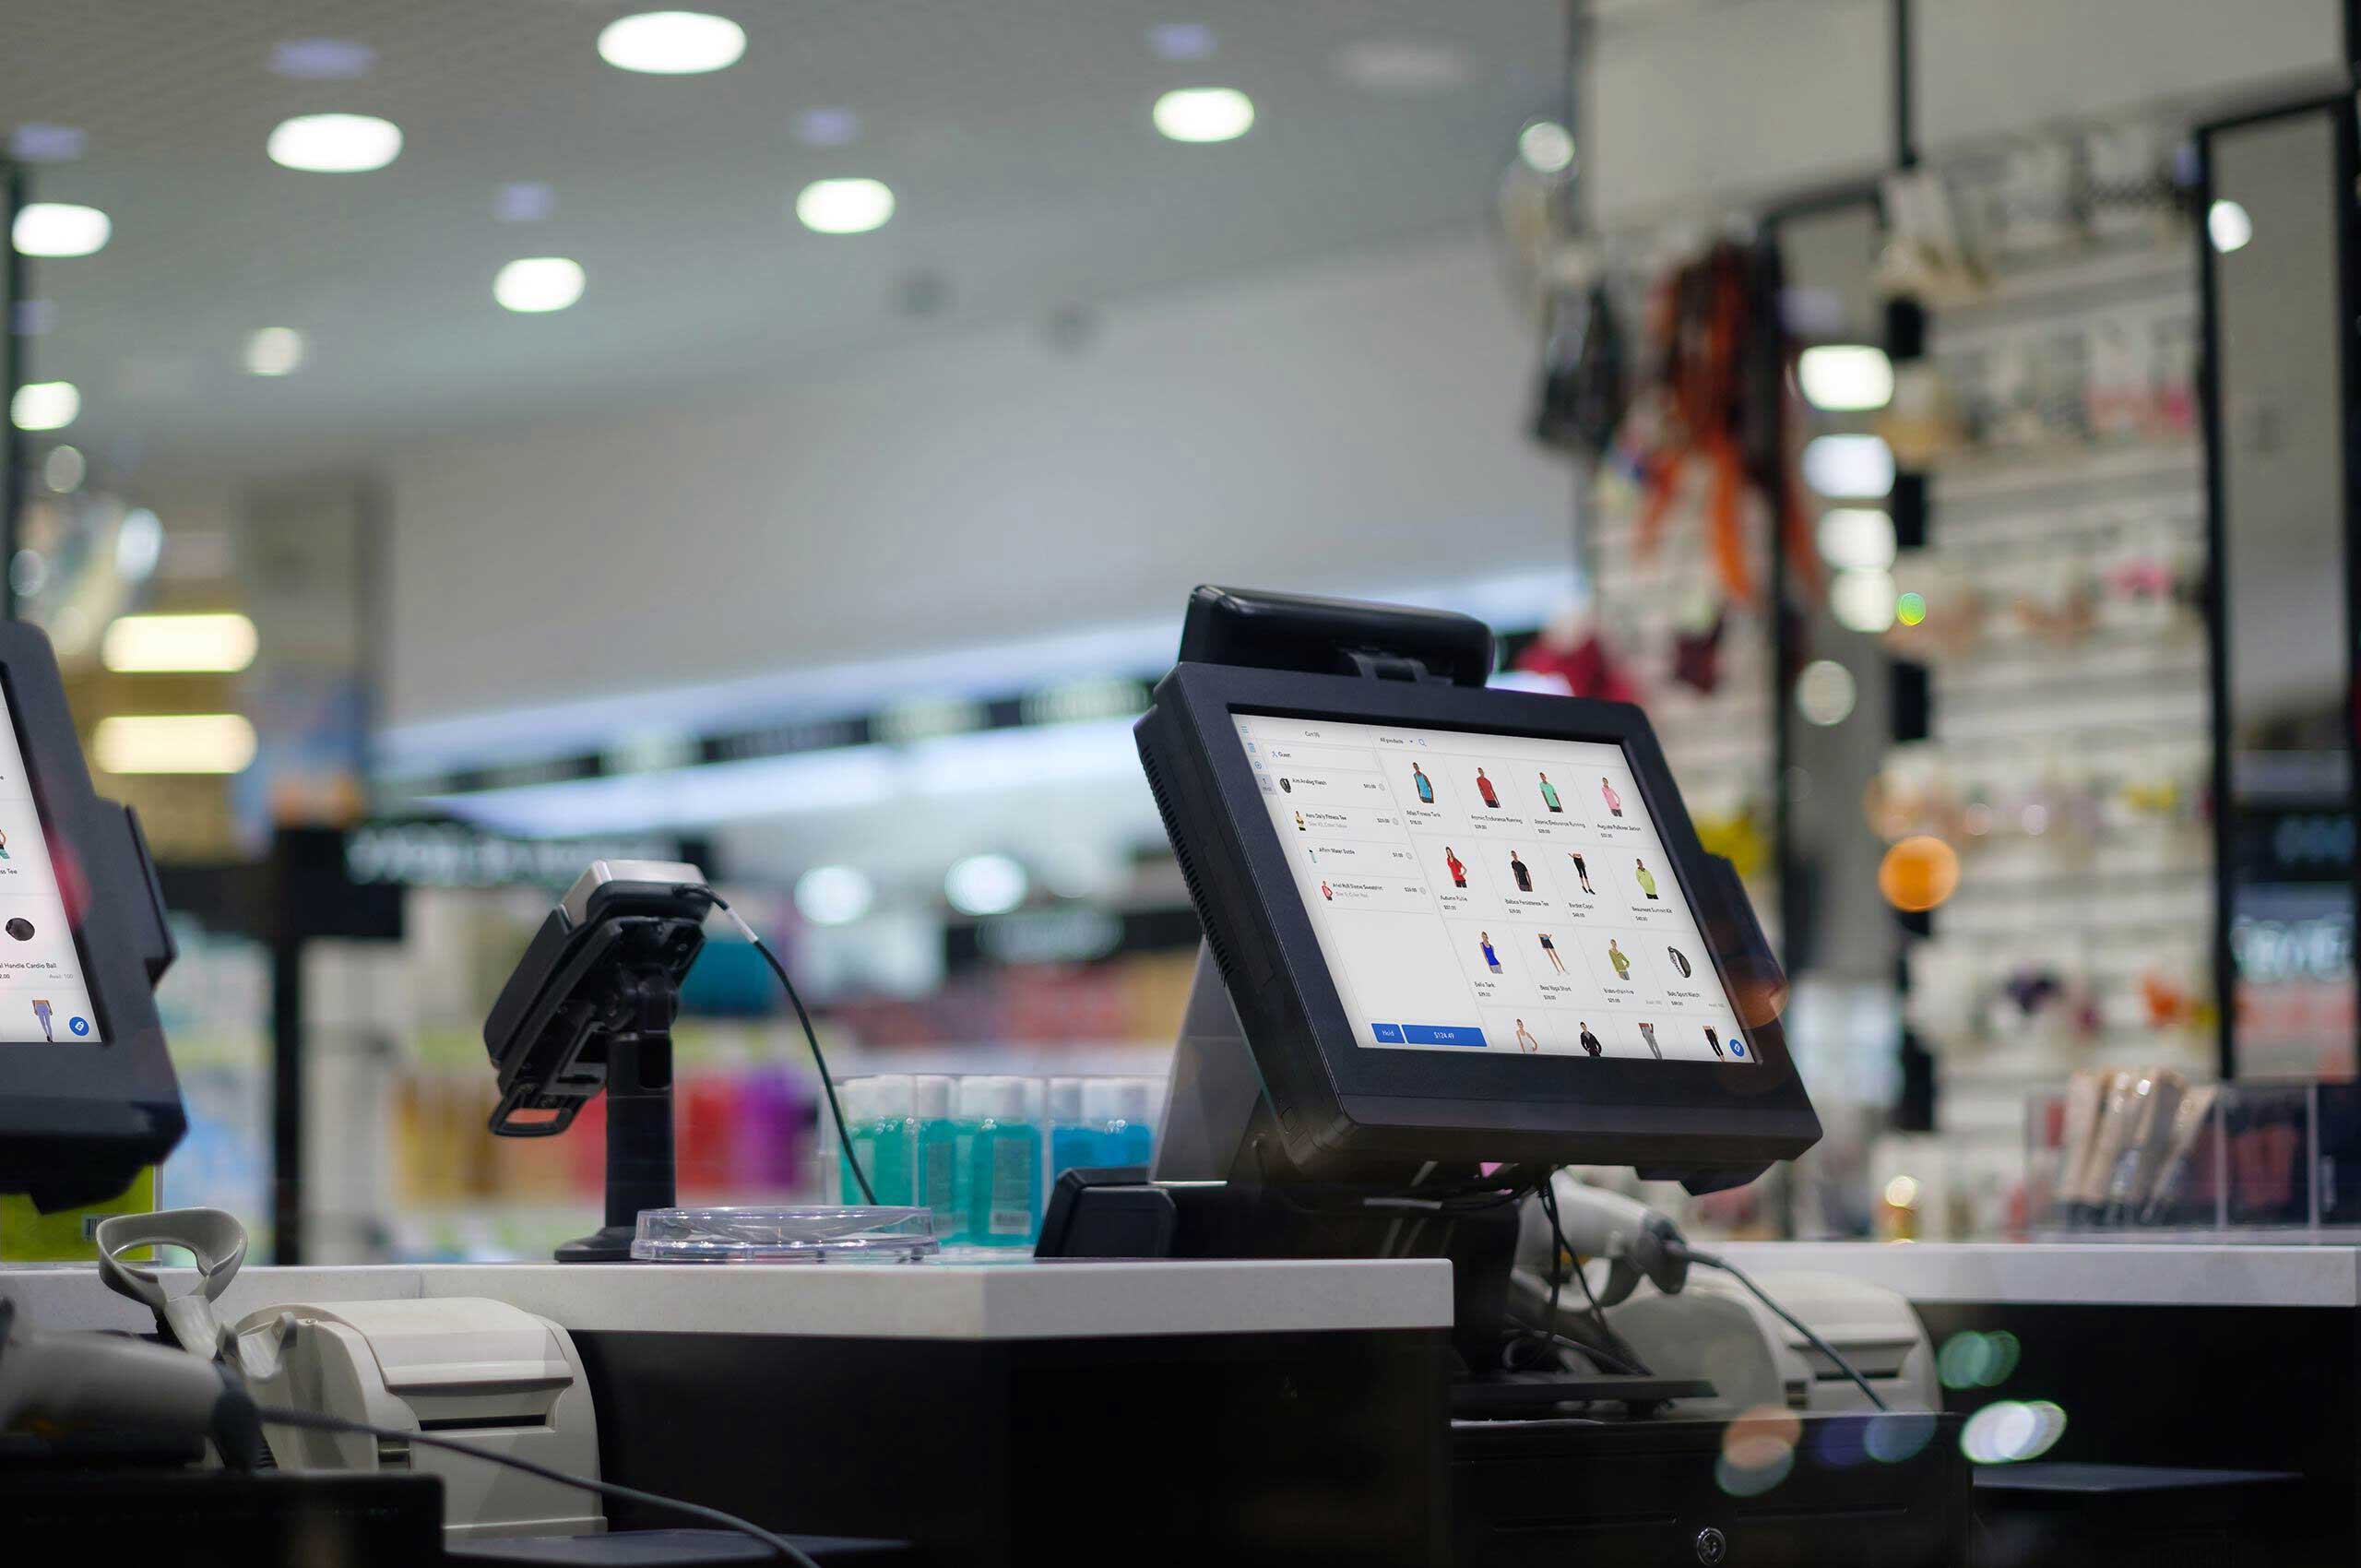 Integrate your cash drawer with a modern POS system